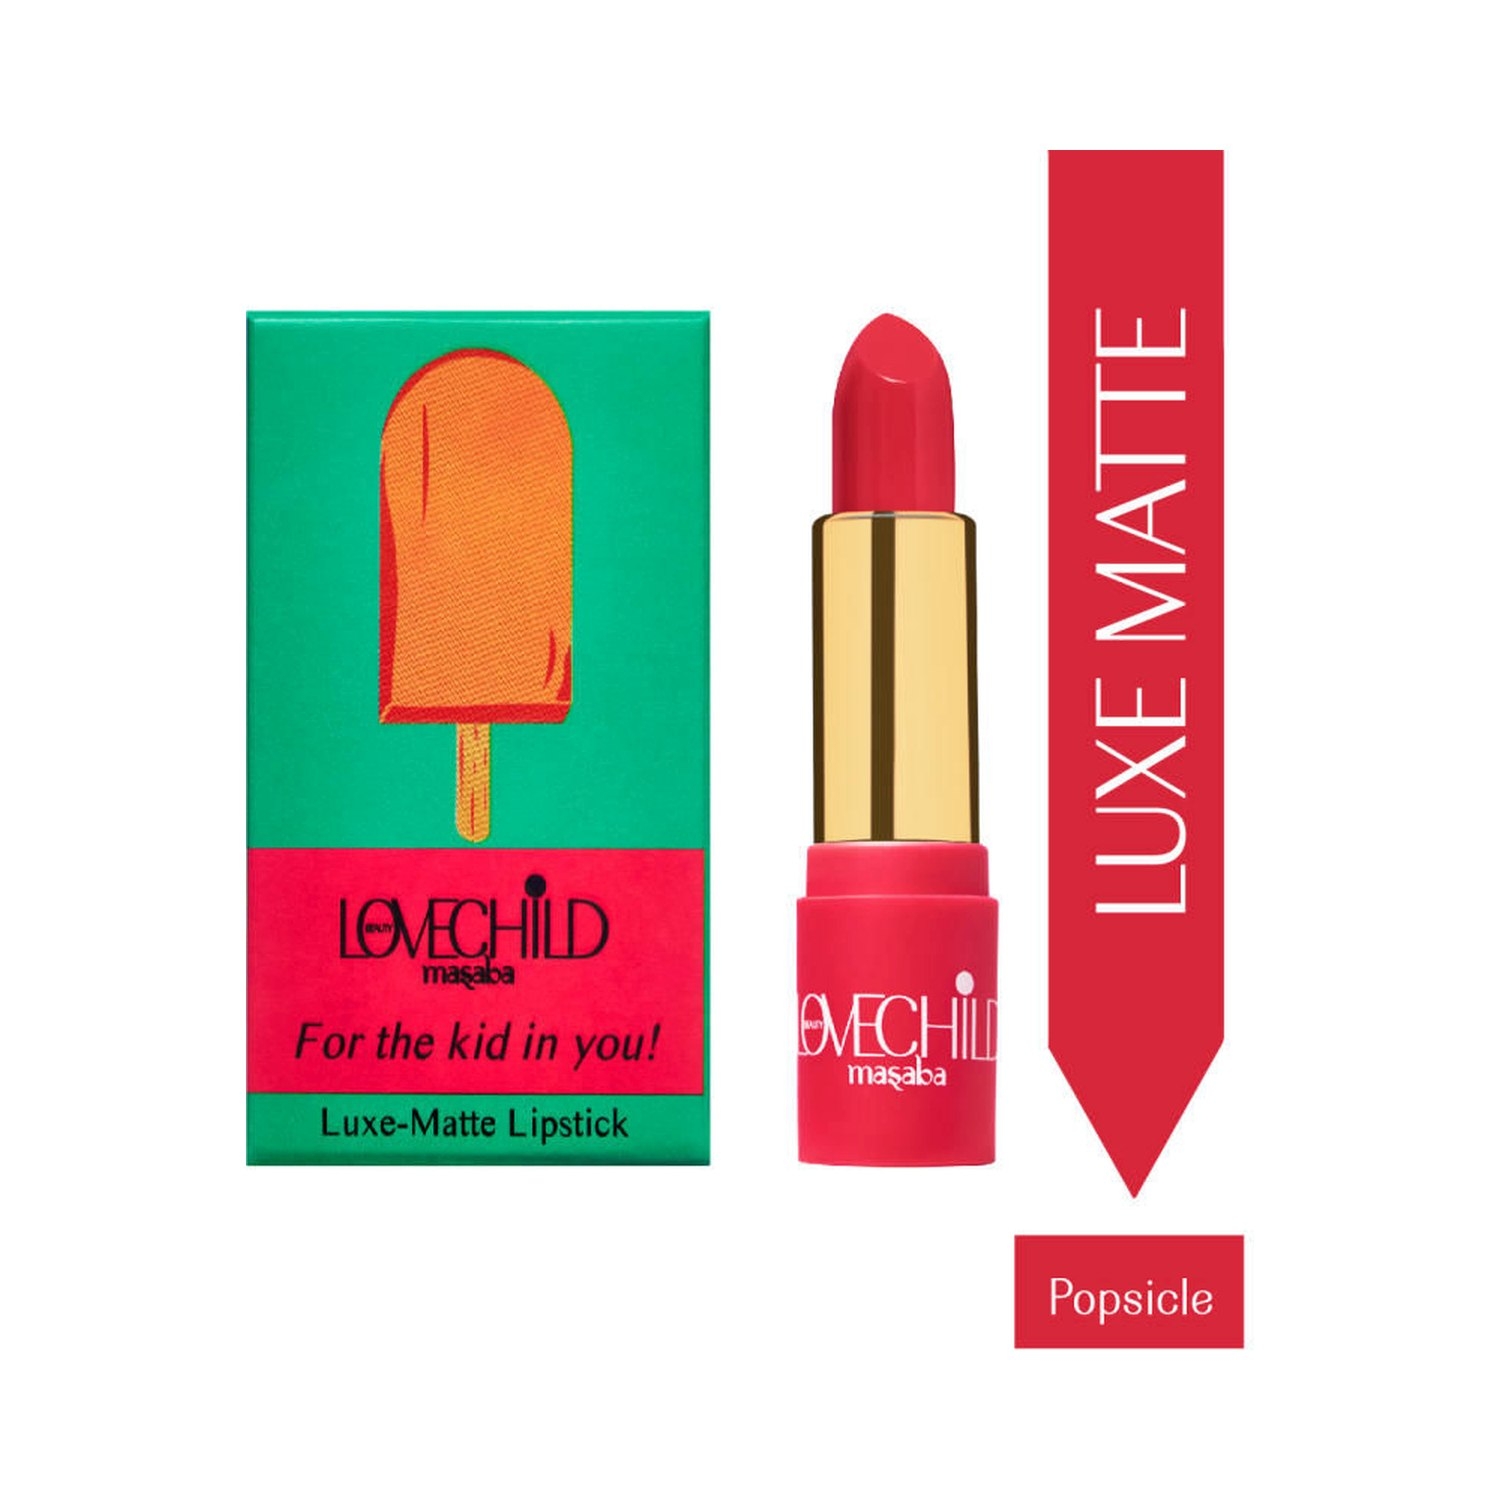 LoveChild Masaba | LoveChild Masaba For The Kid In You! Luxe Matte Lipstick - 02 Popsicle (4g)